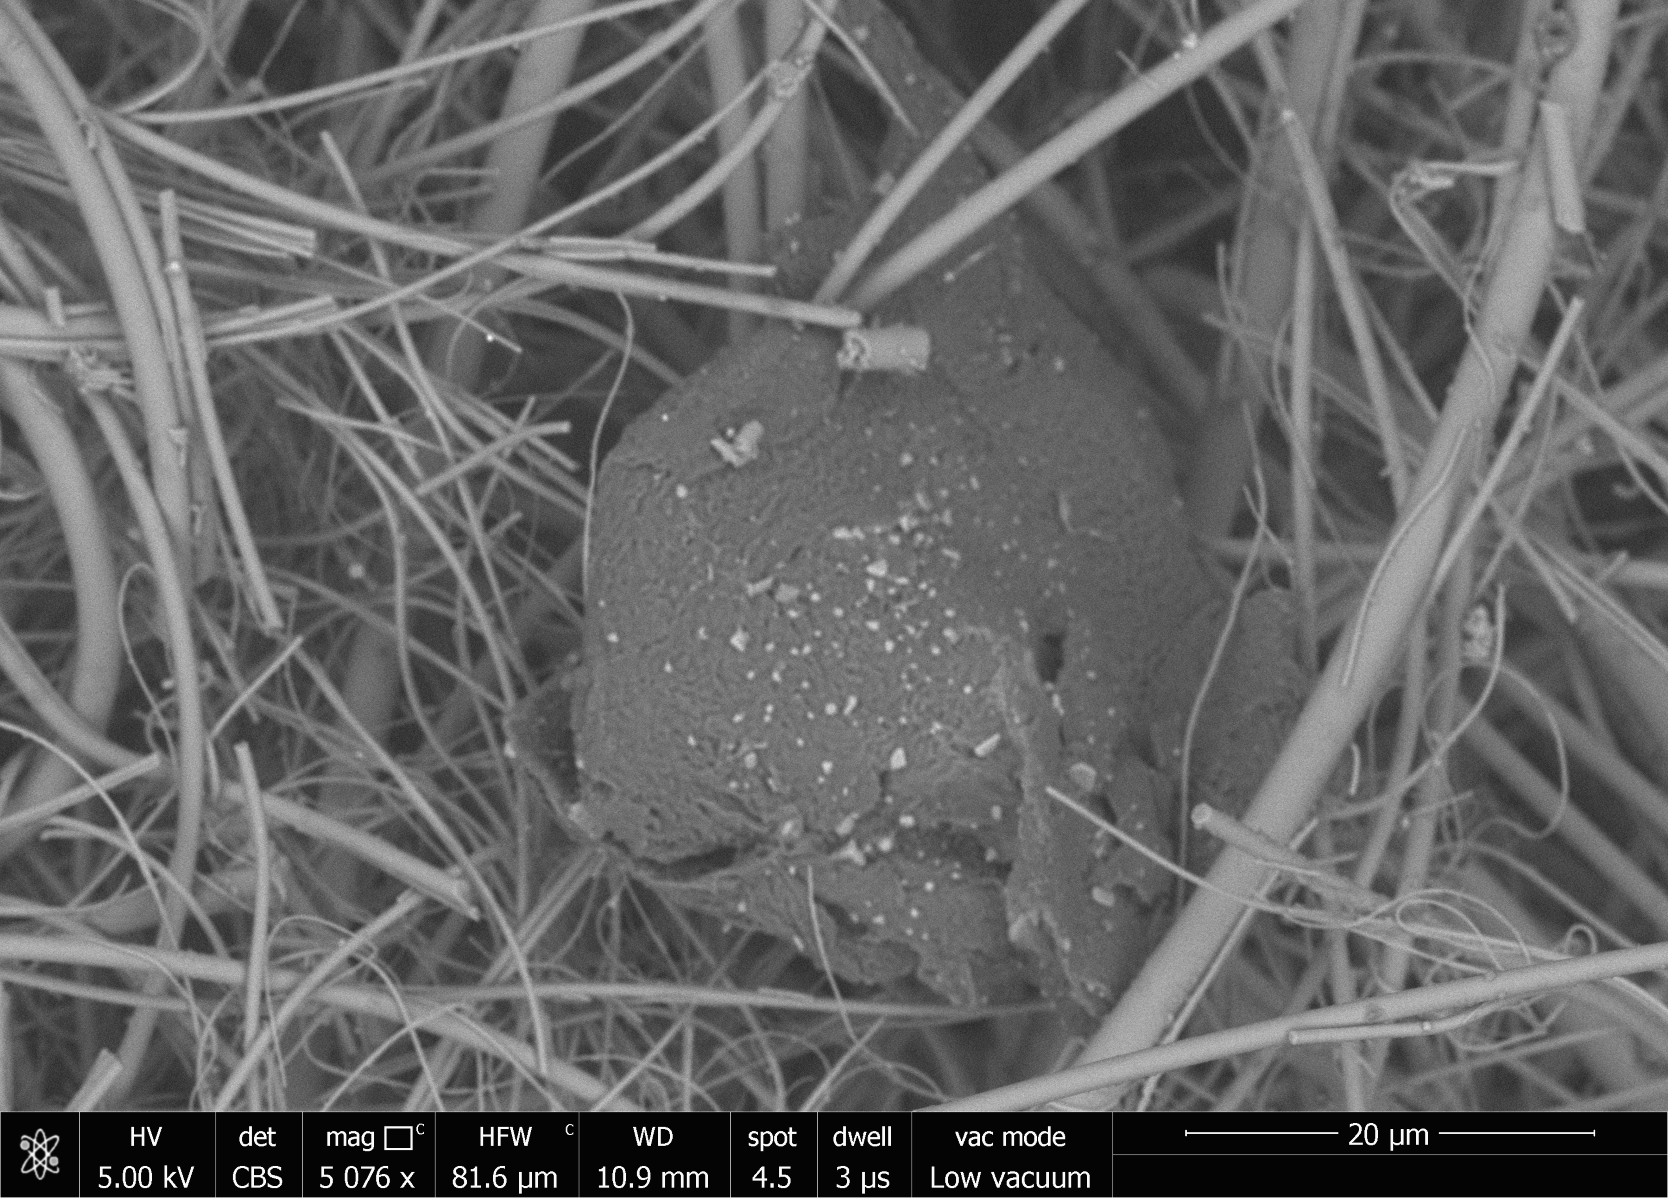 Scanning electron microscope image showing close up of pollution particles, some spiky whilst others are globular